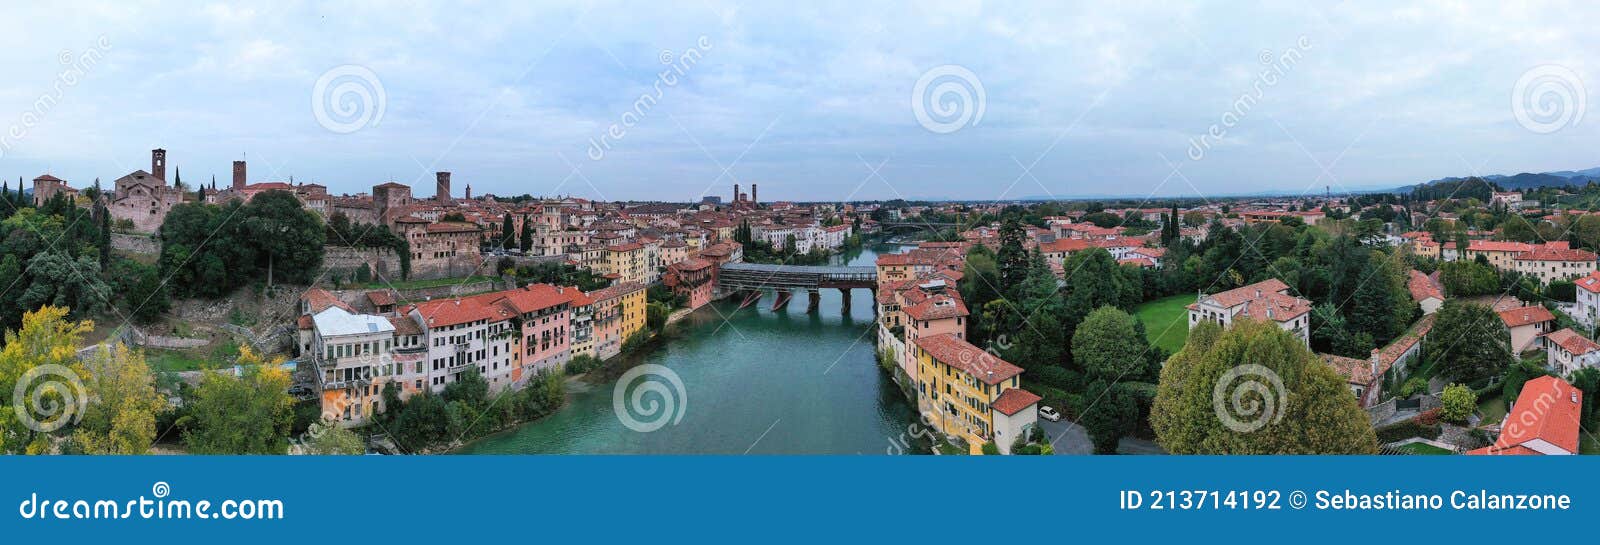 bassano del grappa village in a panoramic view from above